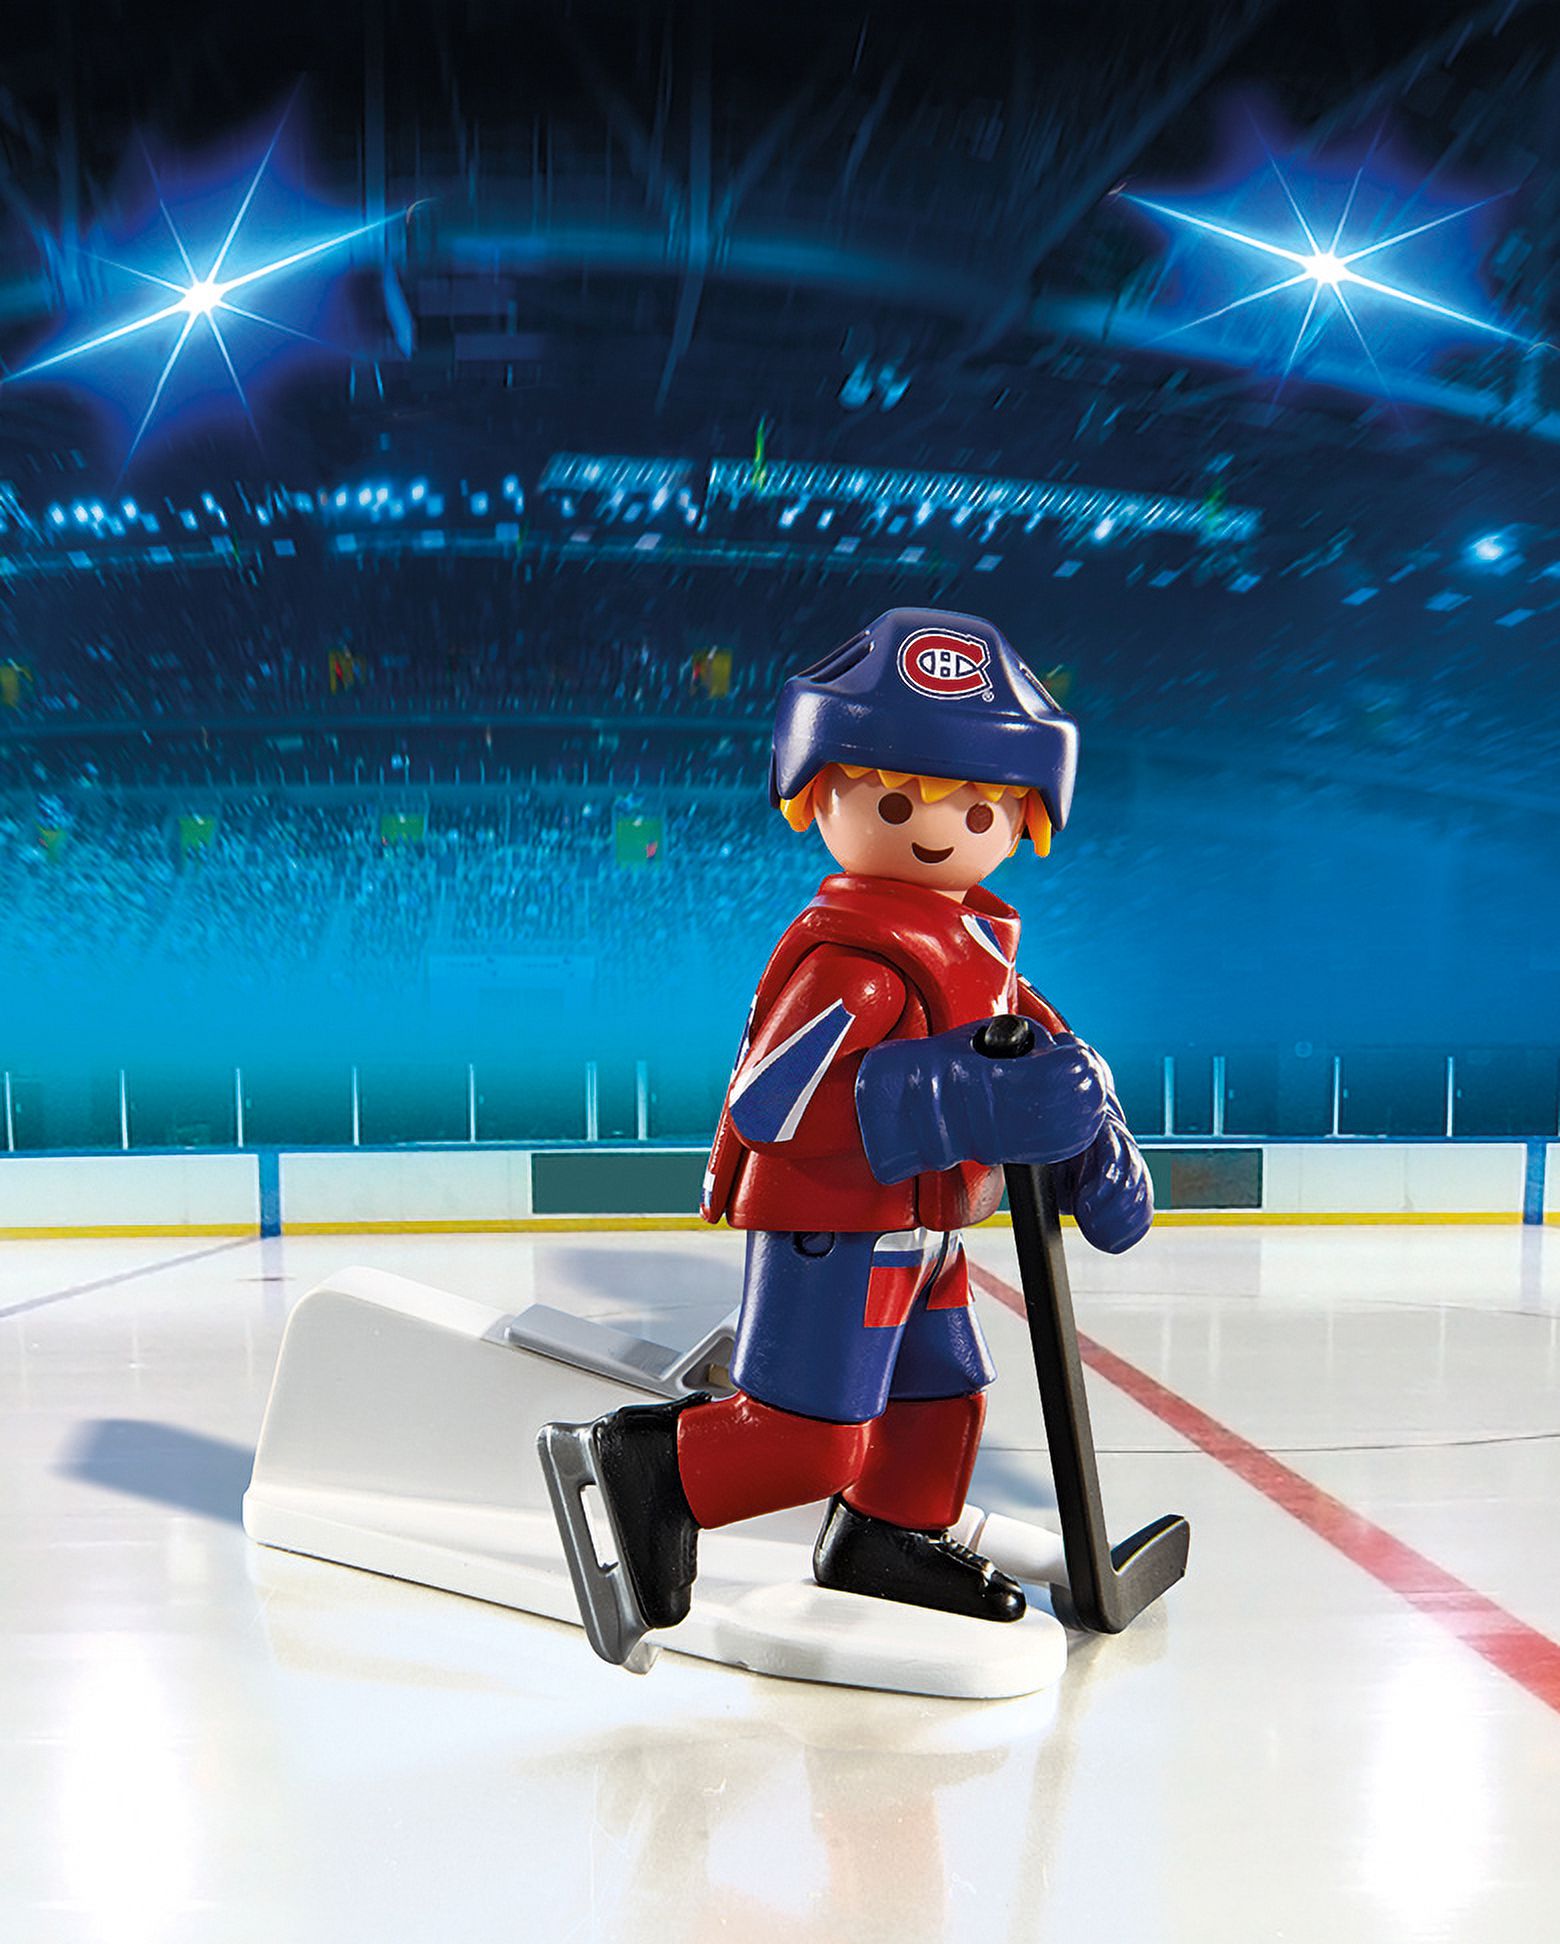 PLAYMOBIL NHL Montreal Canadiens Player Figure - image 2 of 3